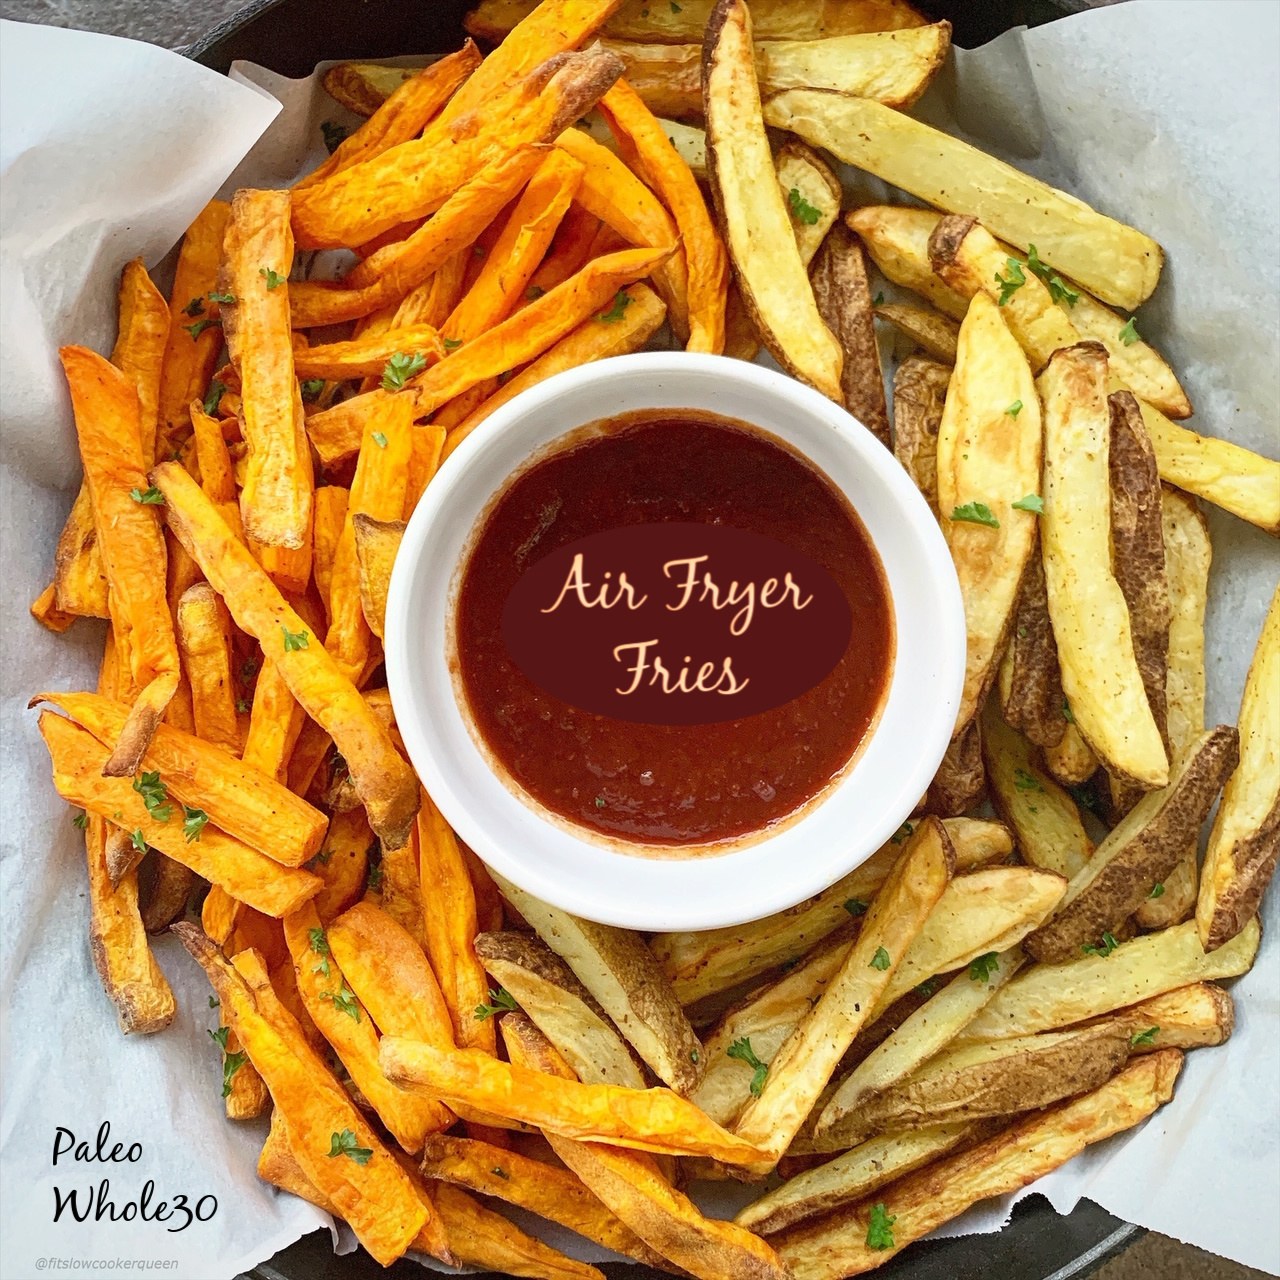 Air fryer, homemade french fries are not only healthy but easy to make. Use this paleo and whole30 recipe for homemade, oil-free french fries or sweet potato fries.